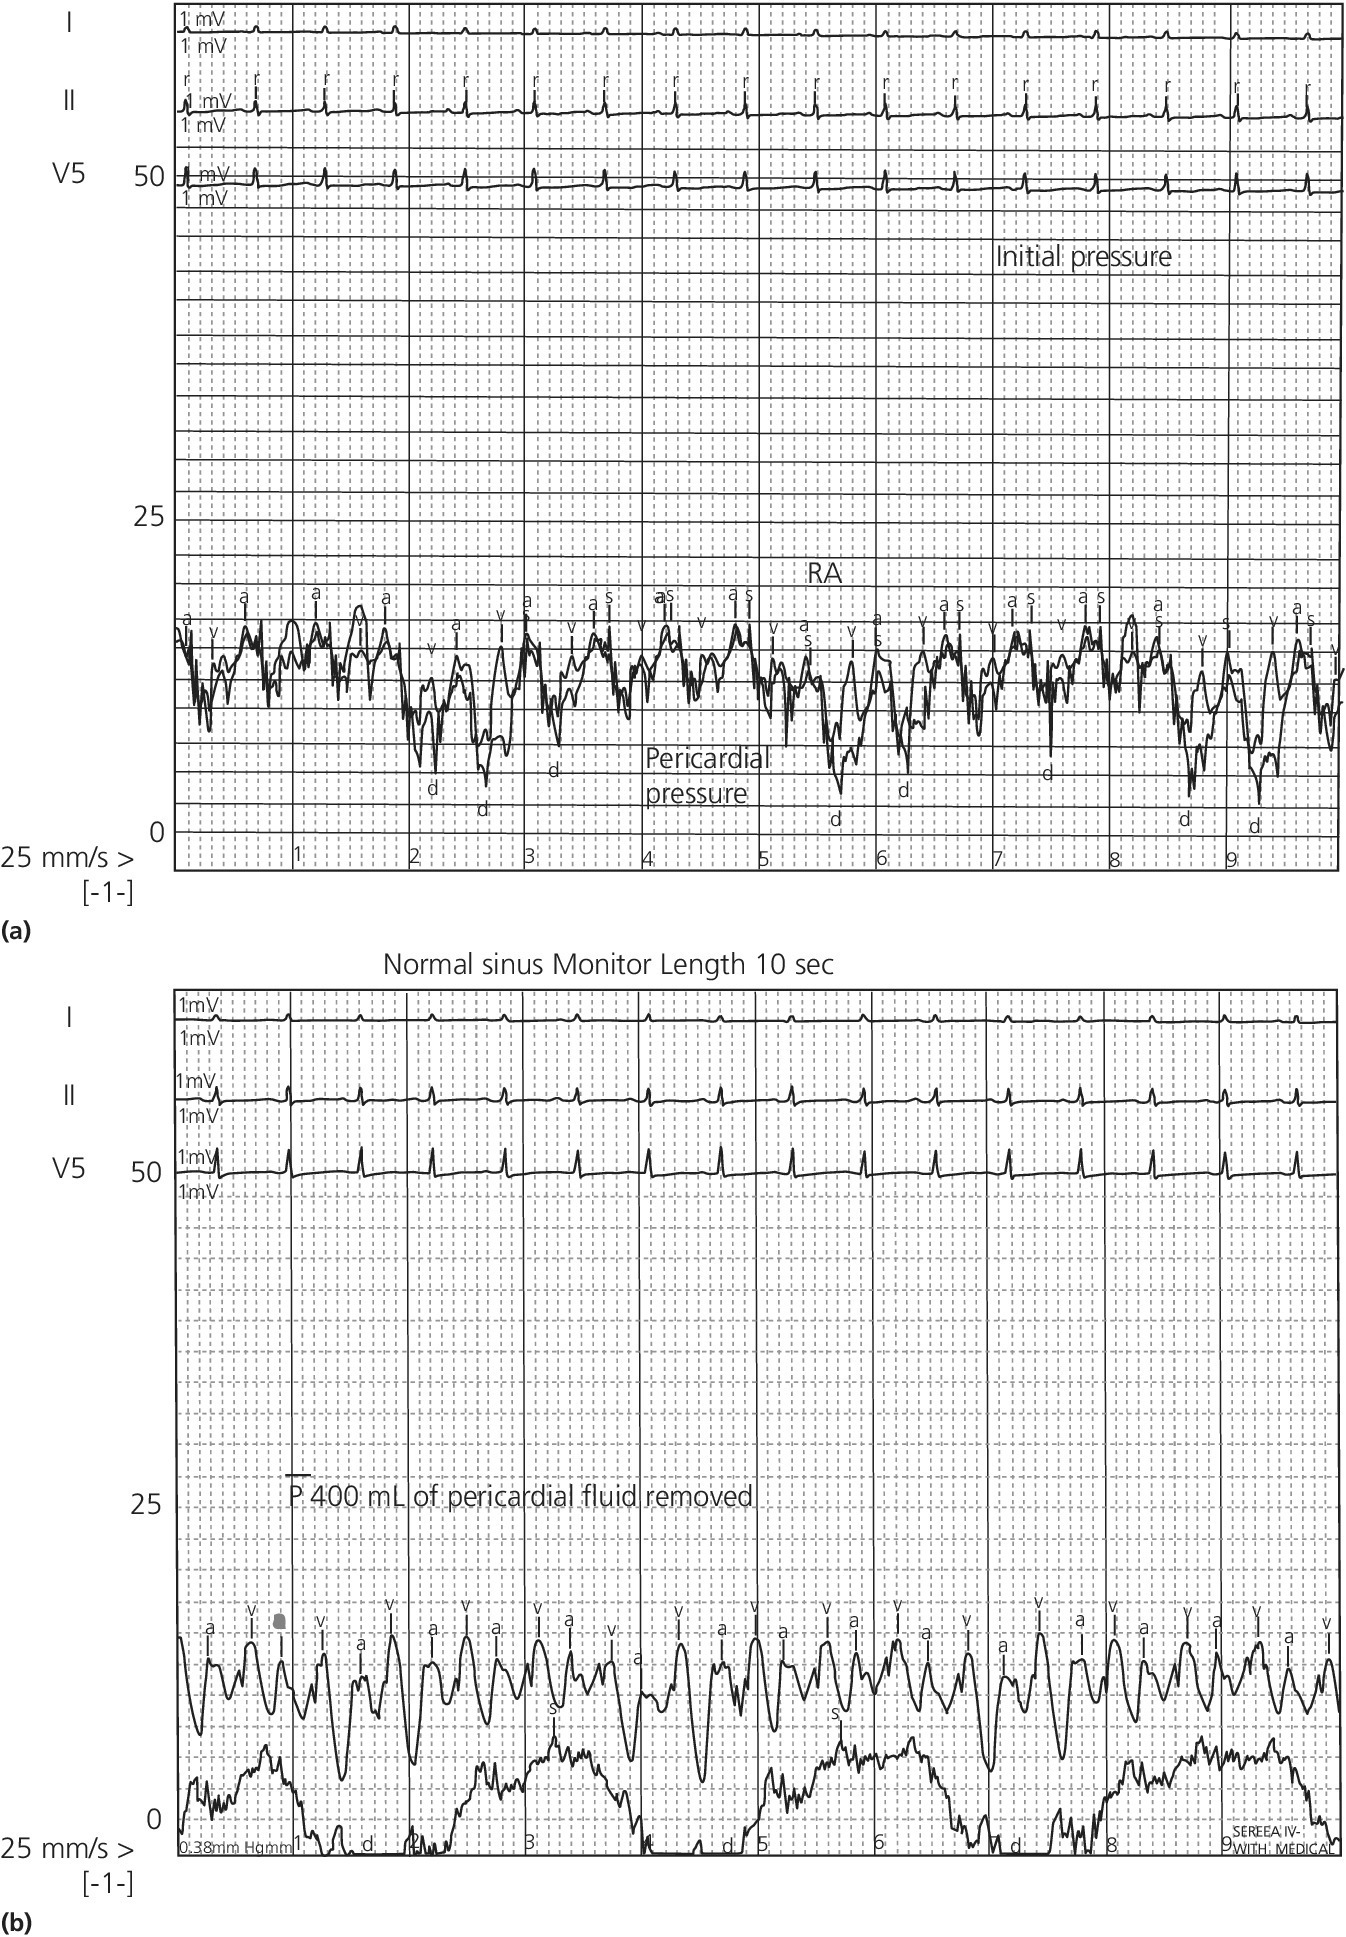 2 Electrocardiograms illustrating simultaneous right atrial and pericardial pressure tracings in a patient with tamponade before (top) and after (bottom) the removal of 400 mL of pericardial fluid.